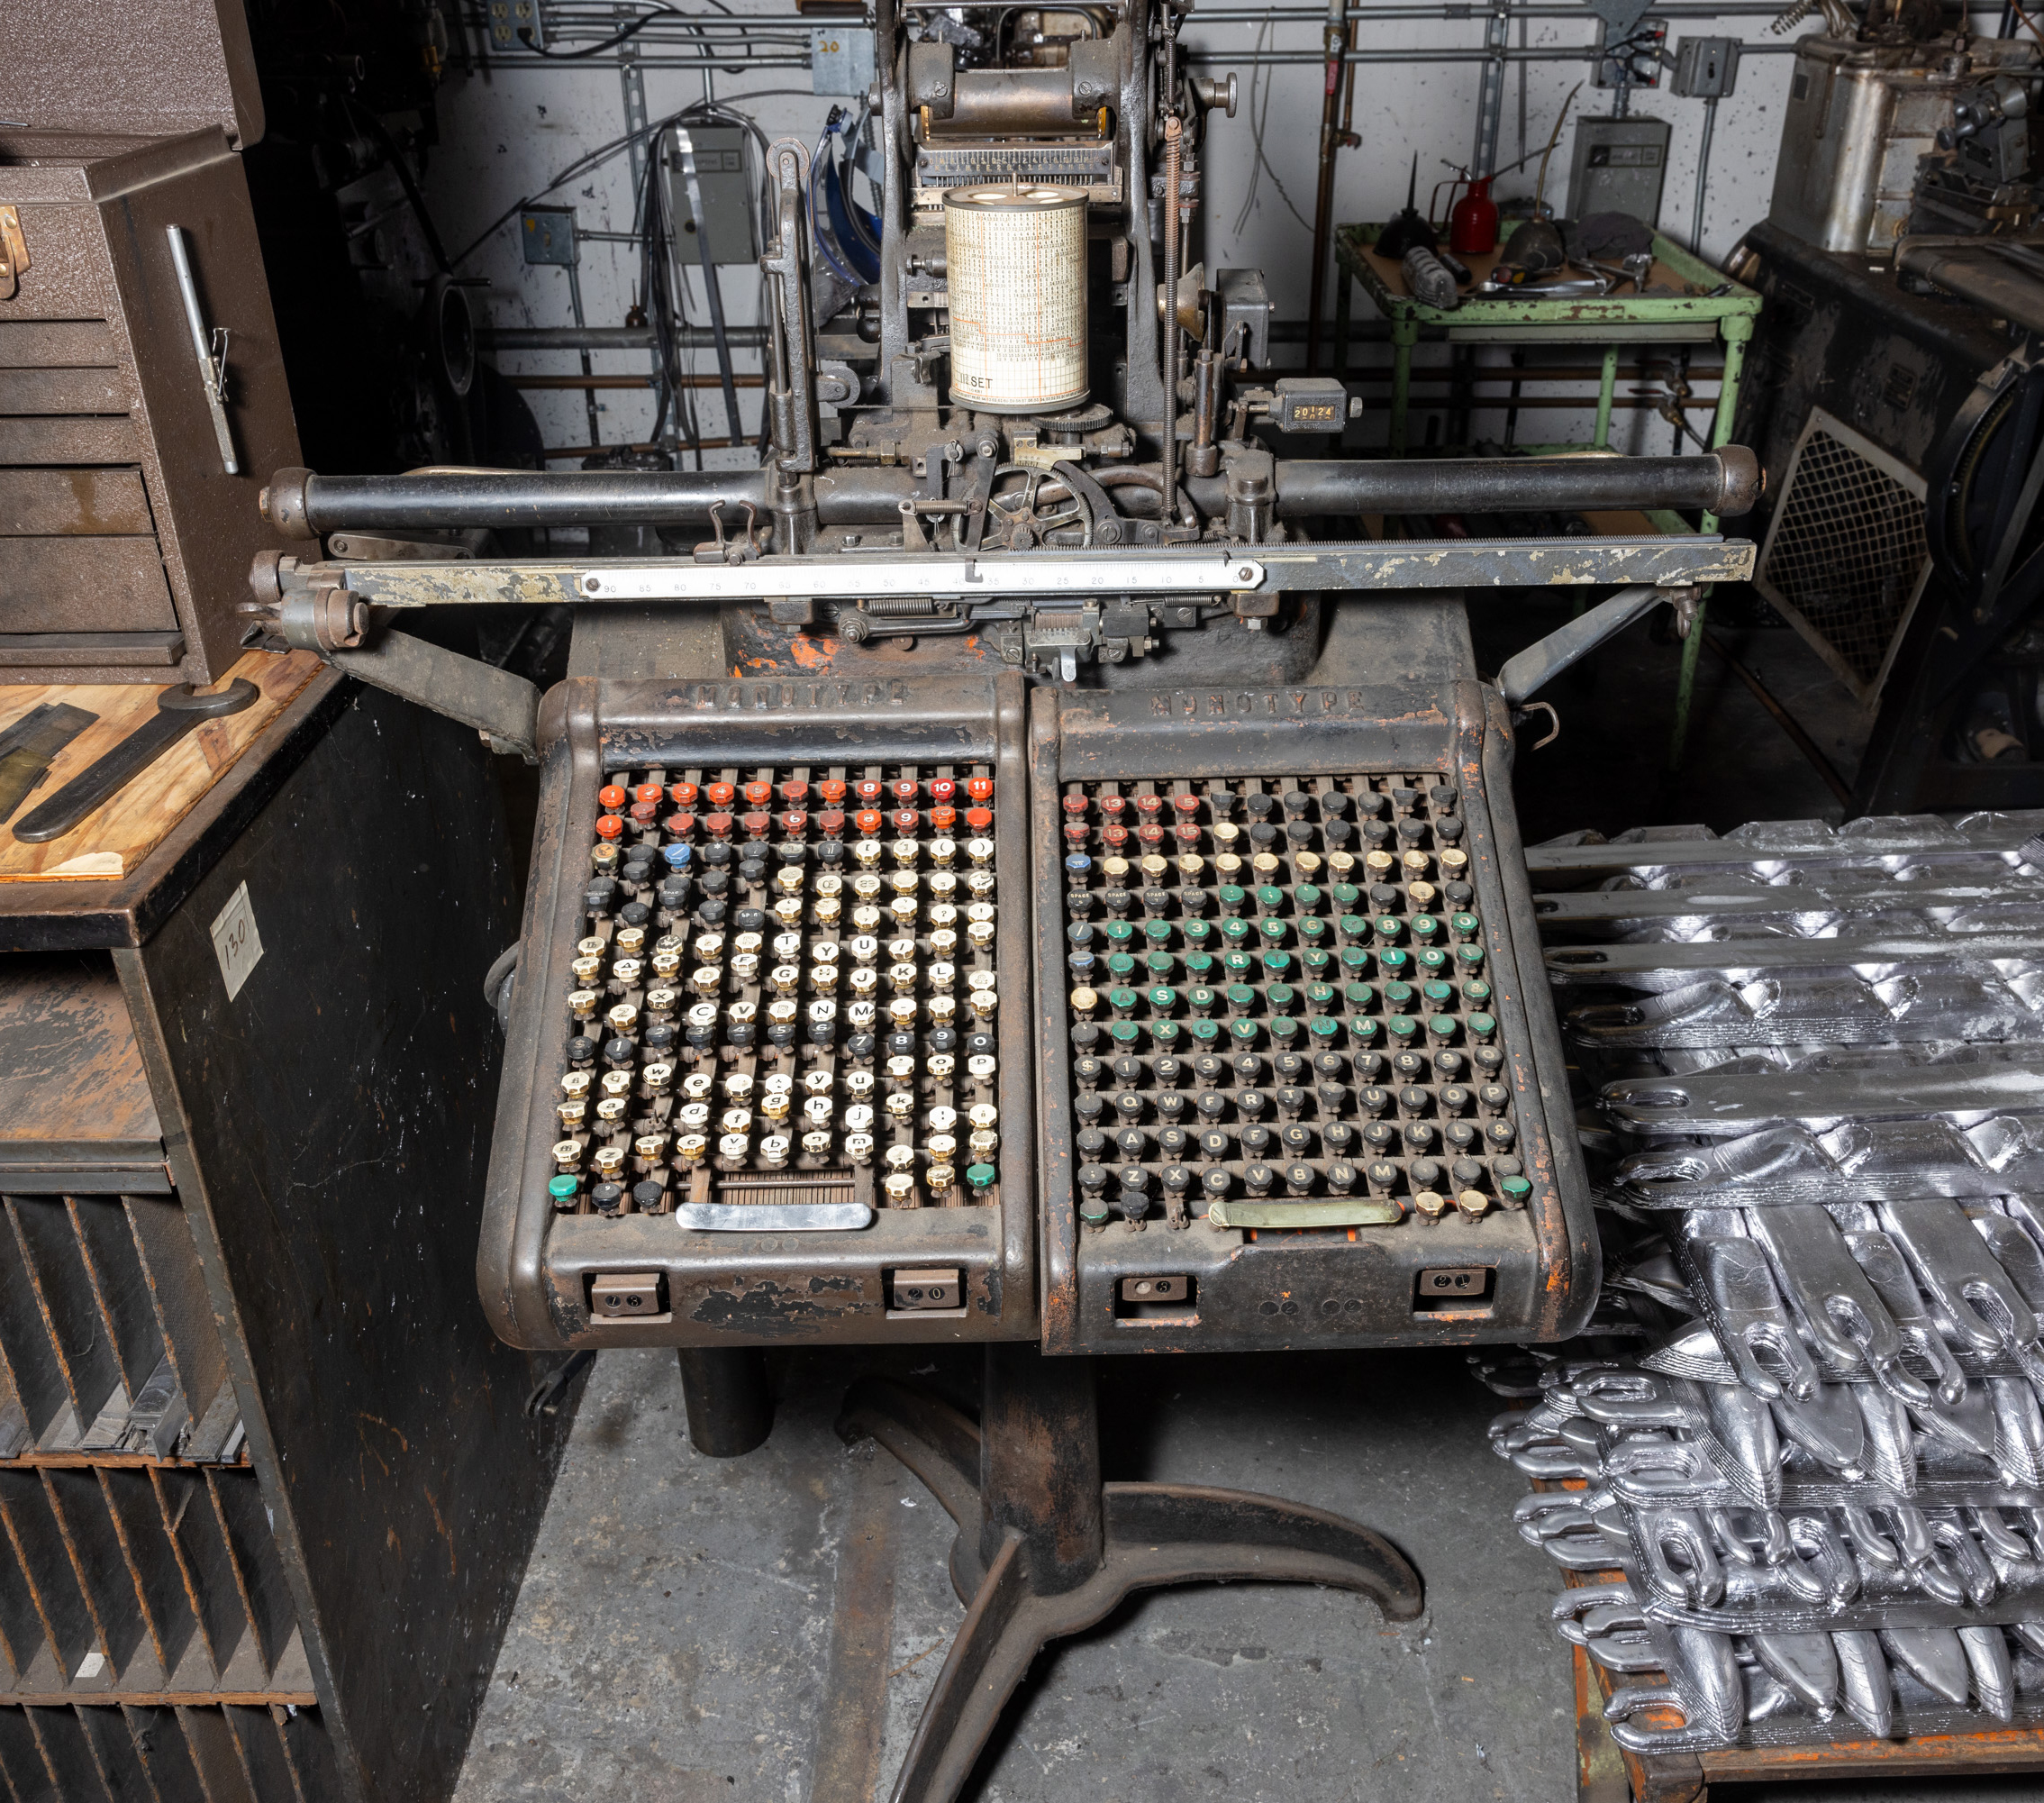 A vintage printing press in a cluttered workshop, with an old, worn-out typesetting machine featuring multiple colorful keys in the foreground.